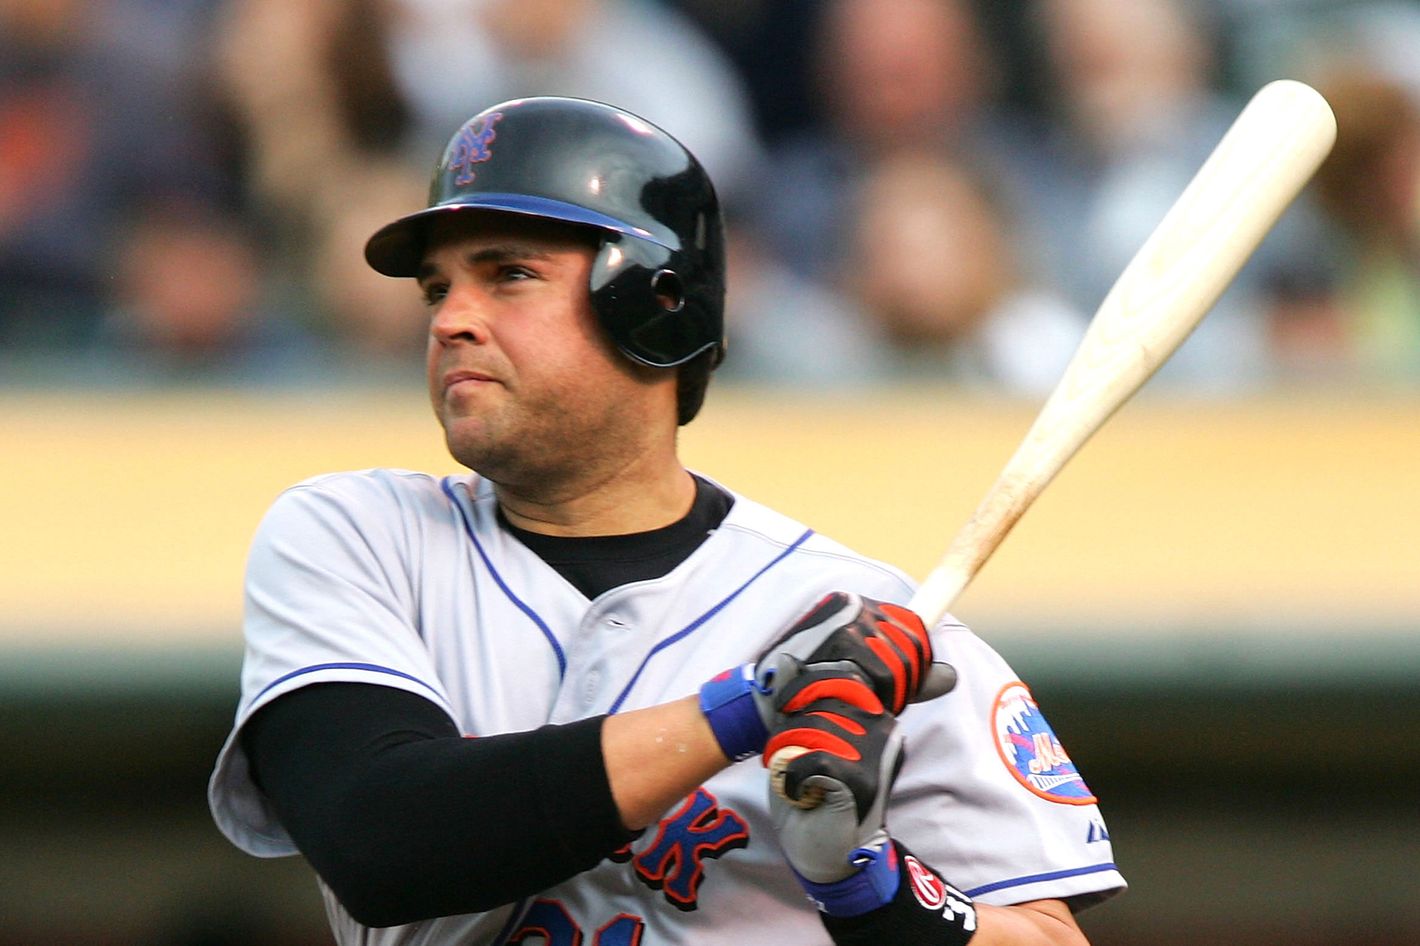 Mike Piazza Was More Than A Big Bat